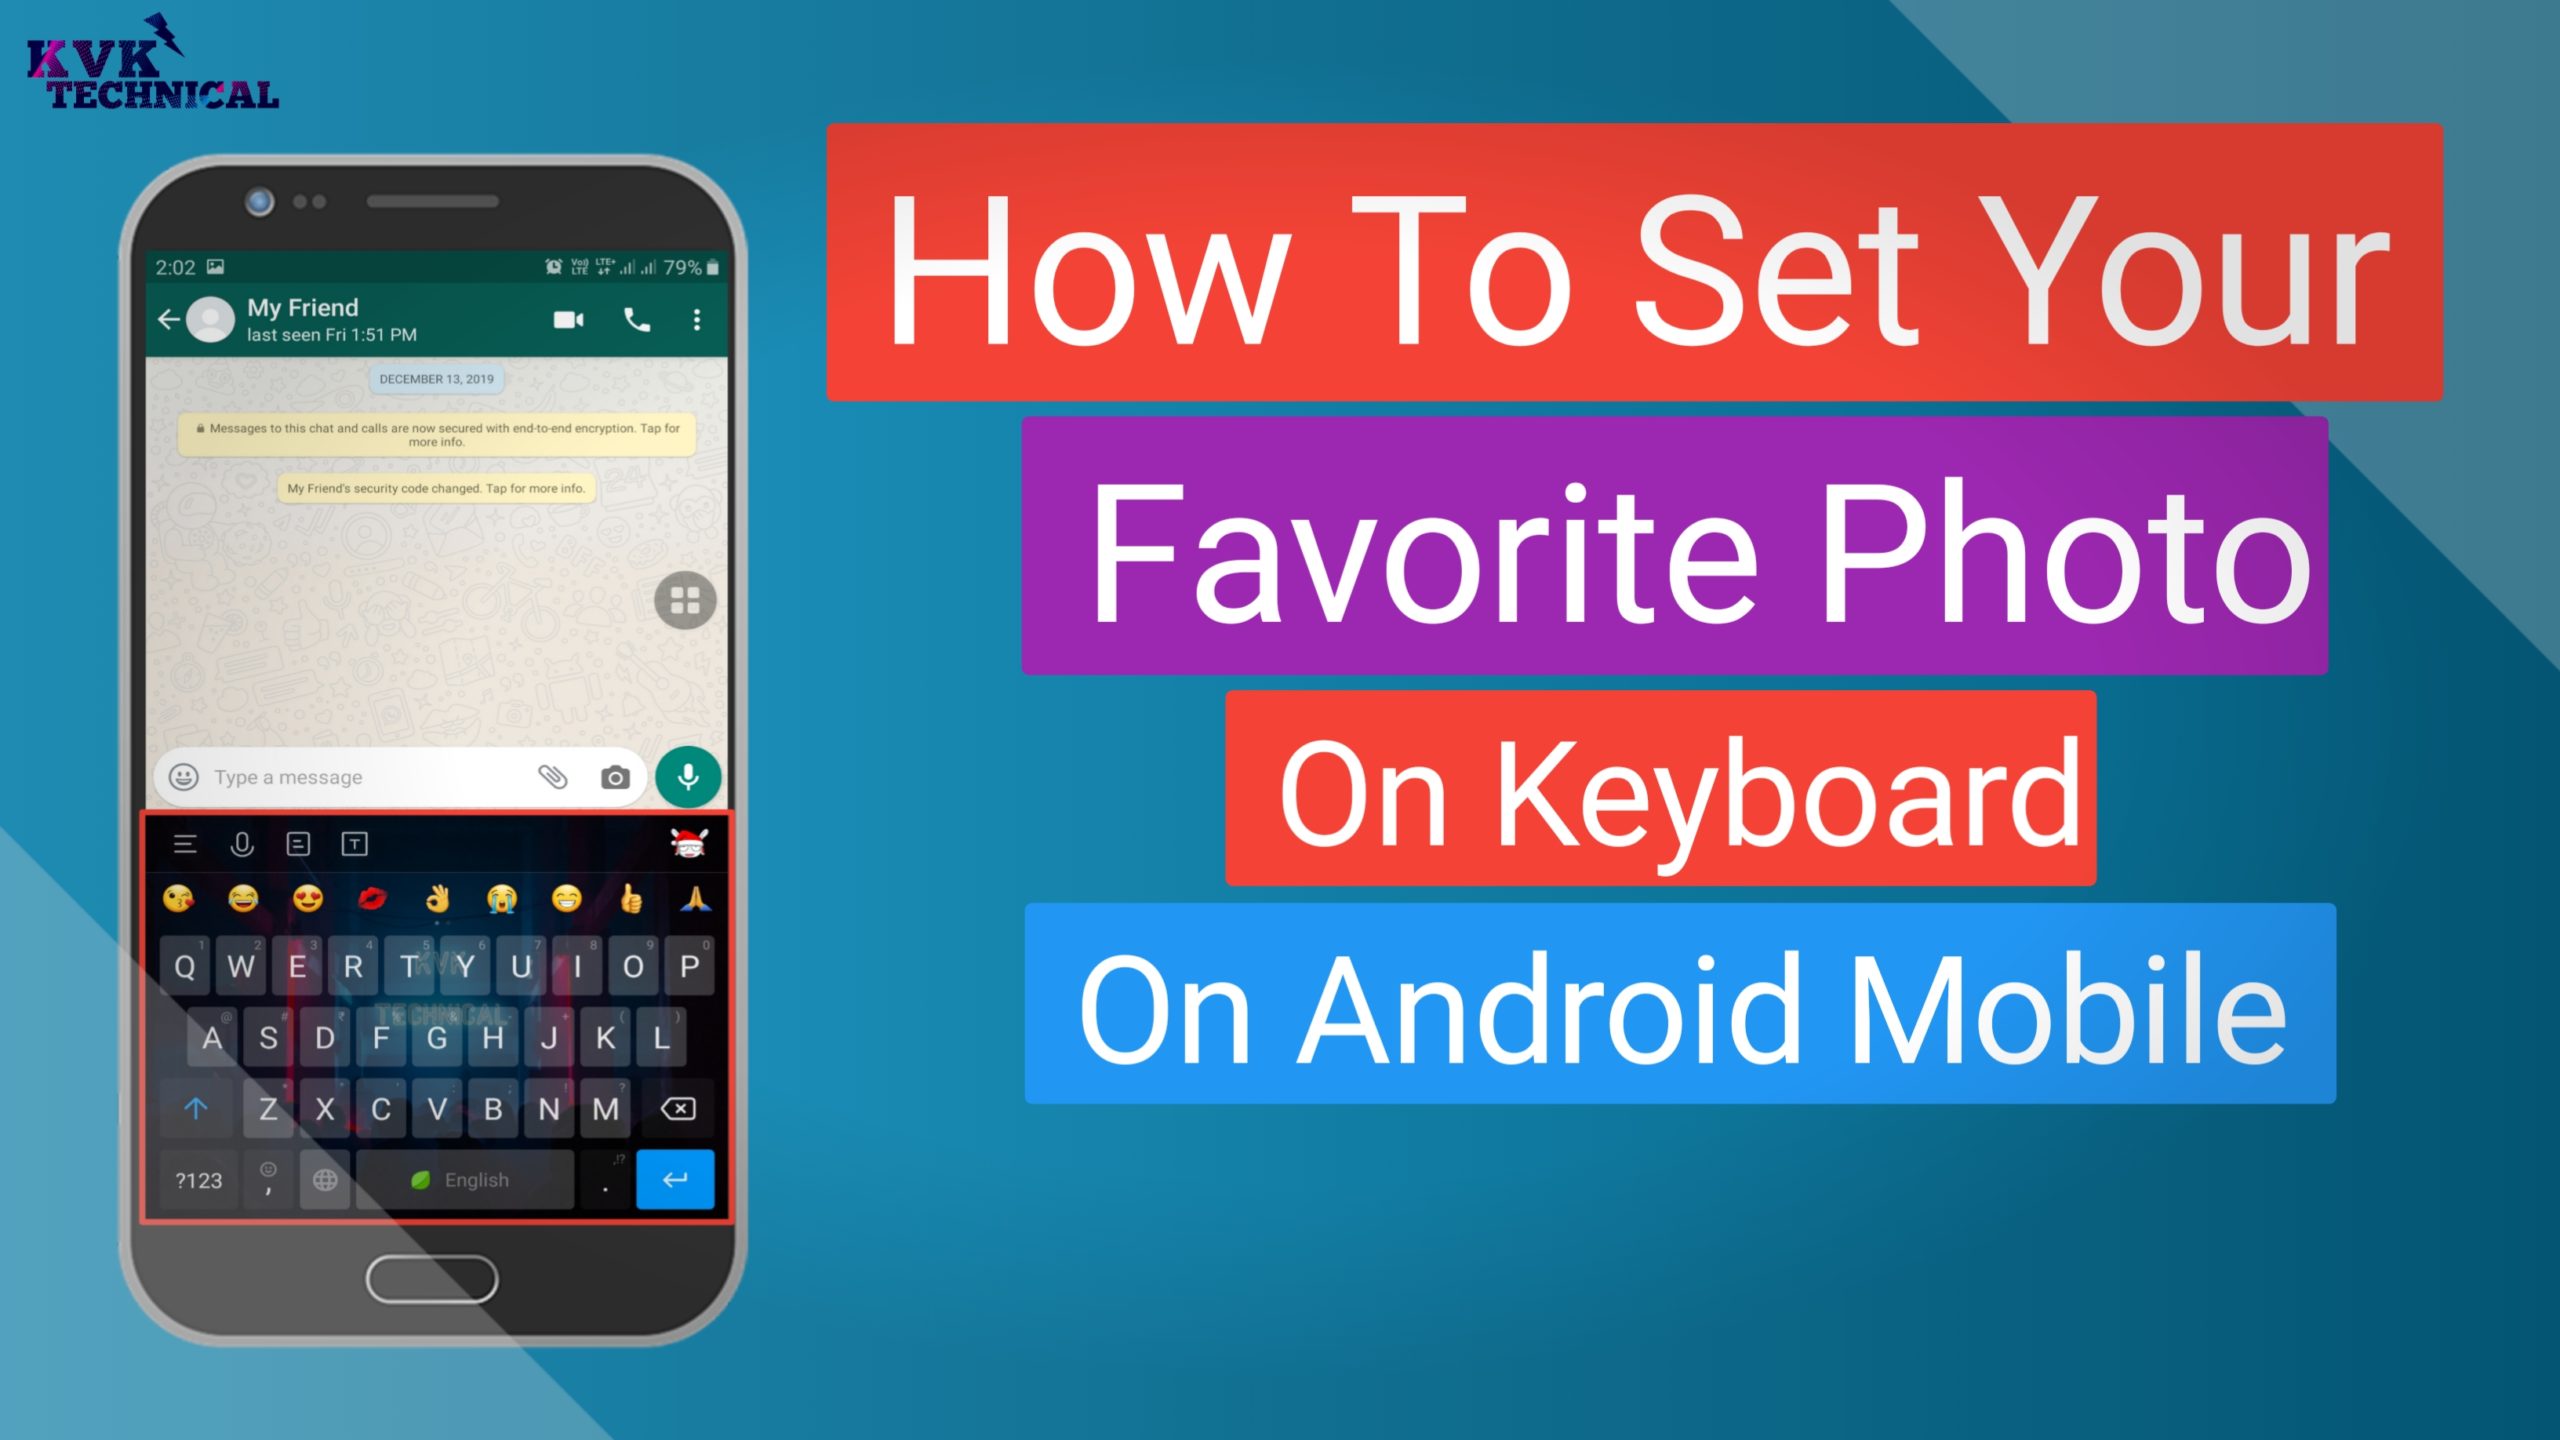 How To Set Your Favorite Photos To Keyboard On Android Mobile